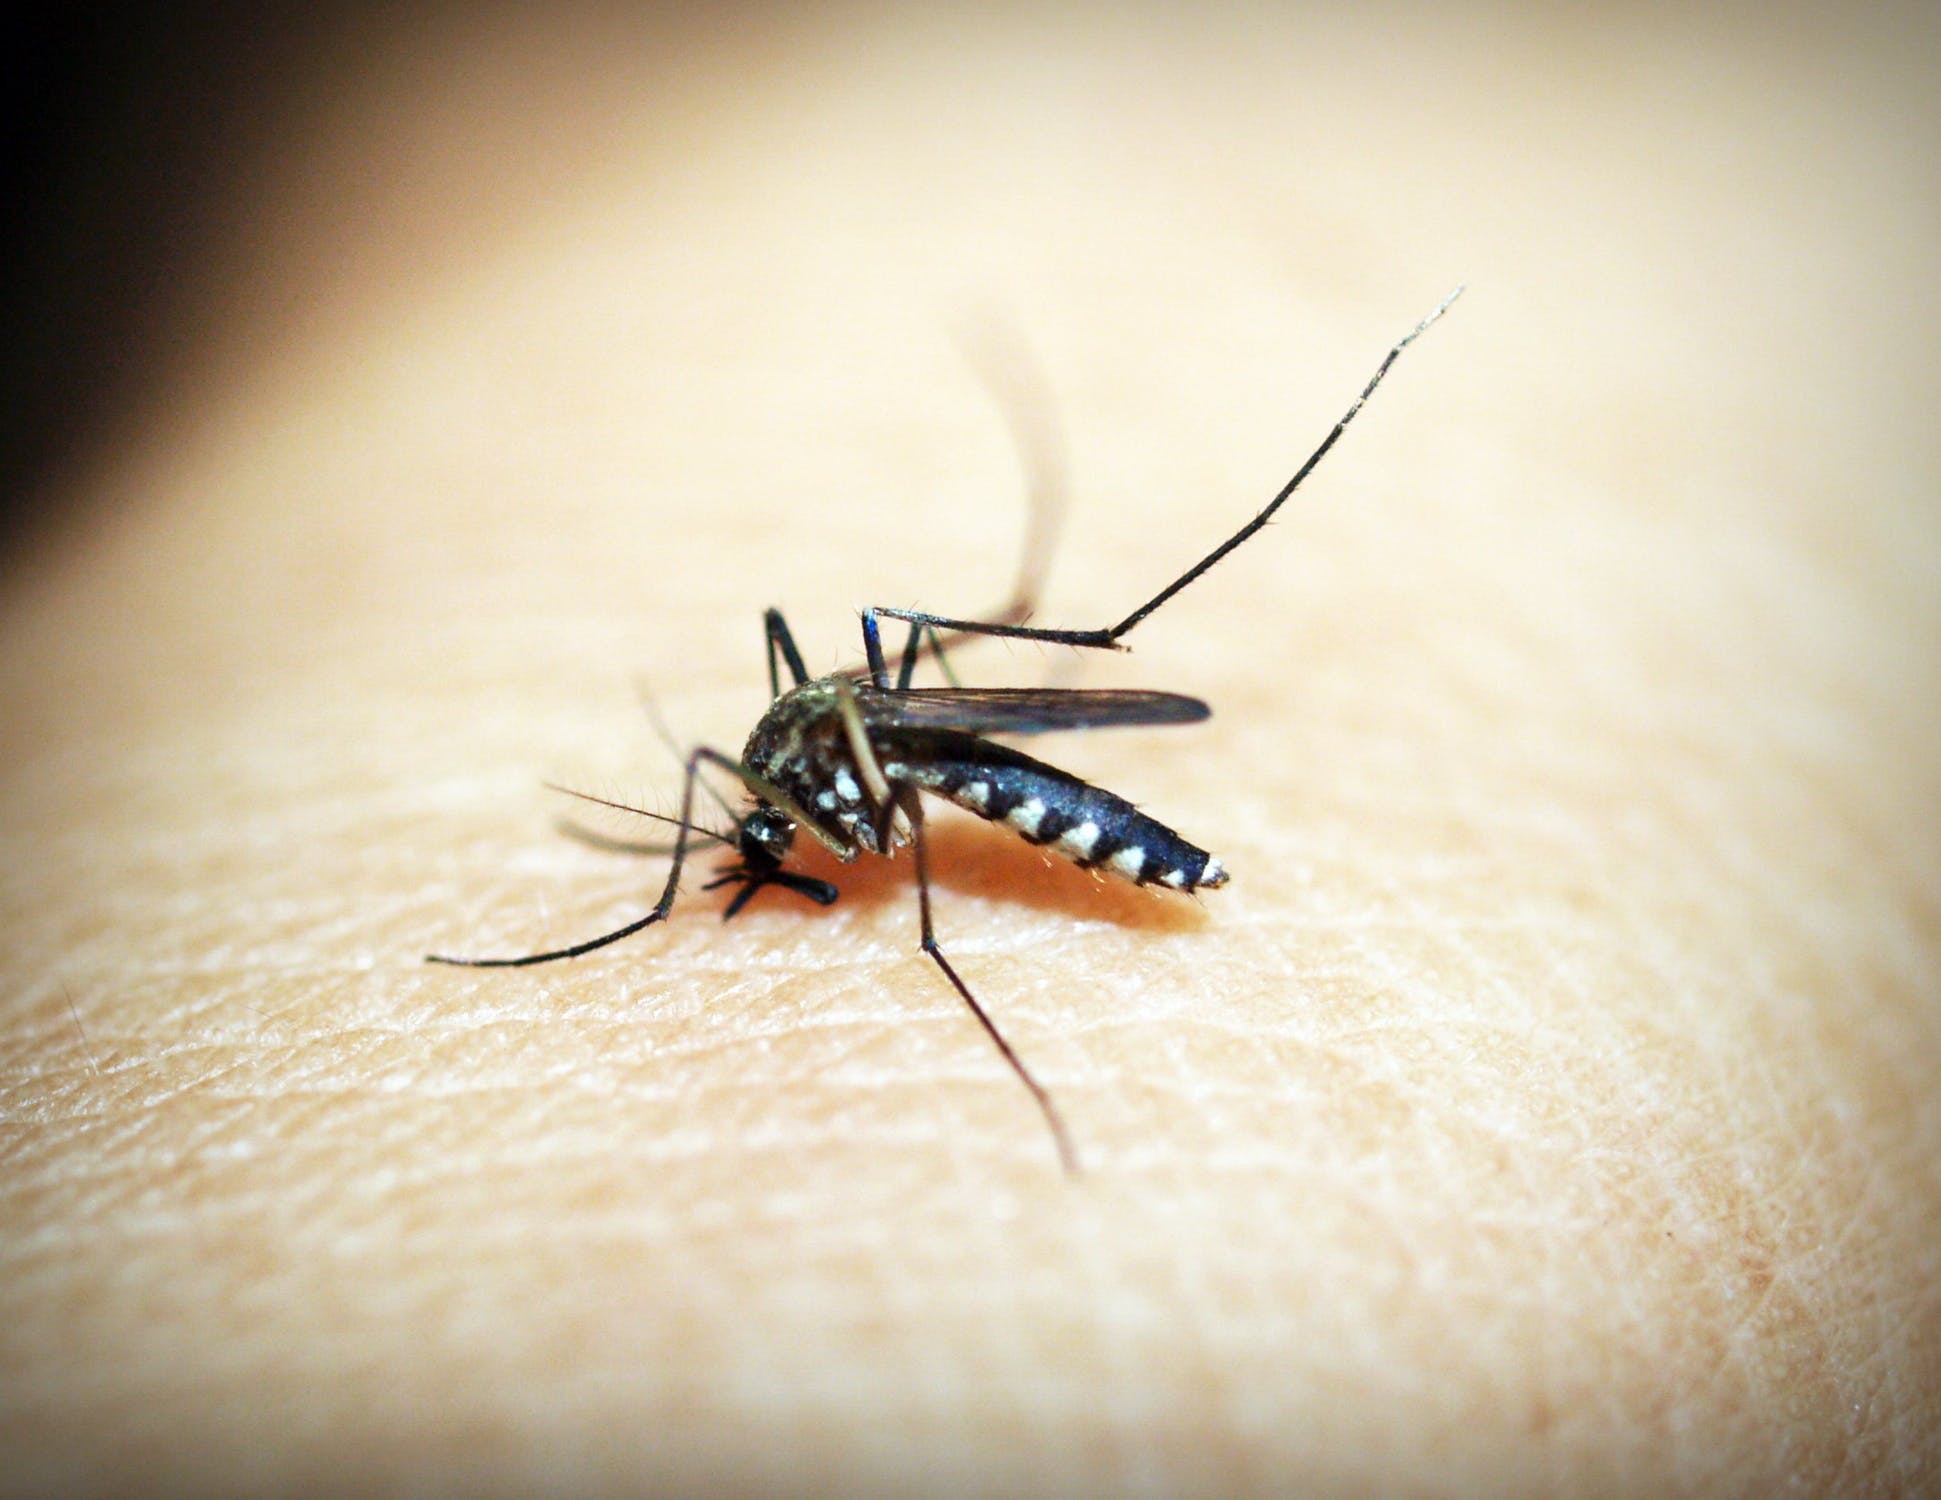 How Do Natural Insect Repellents Work?